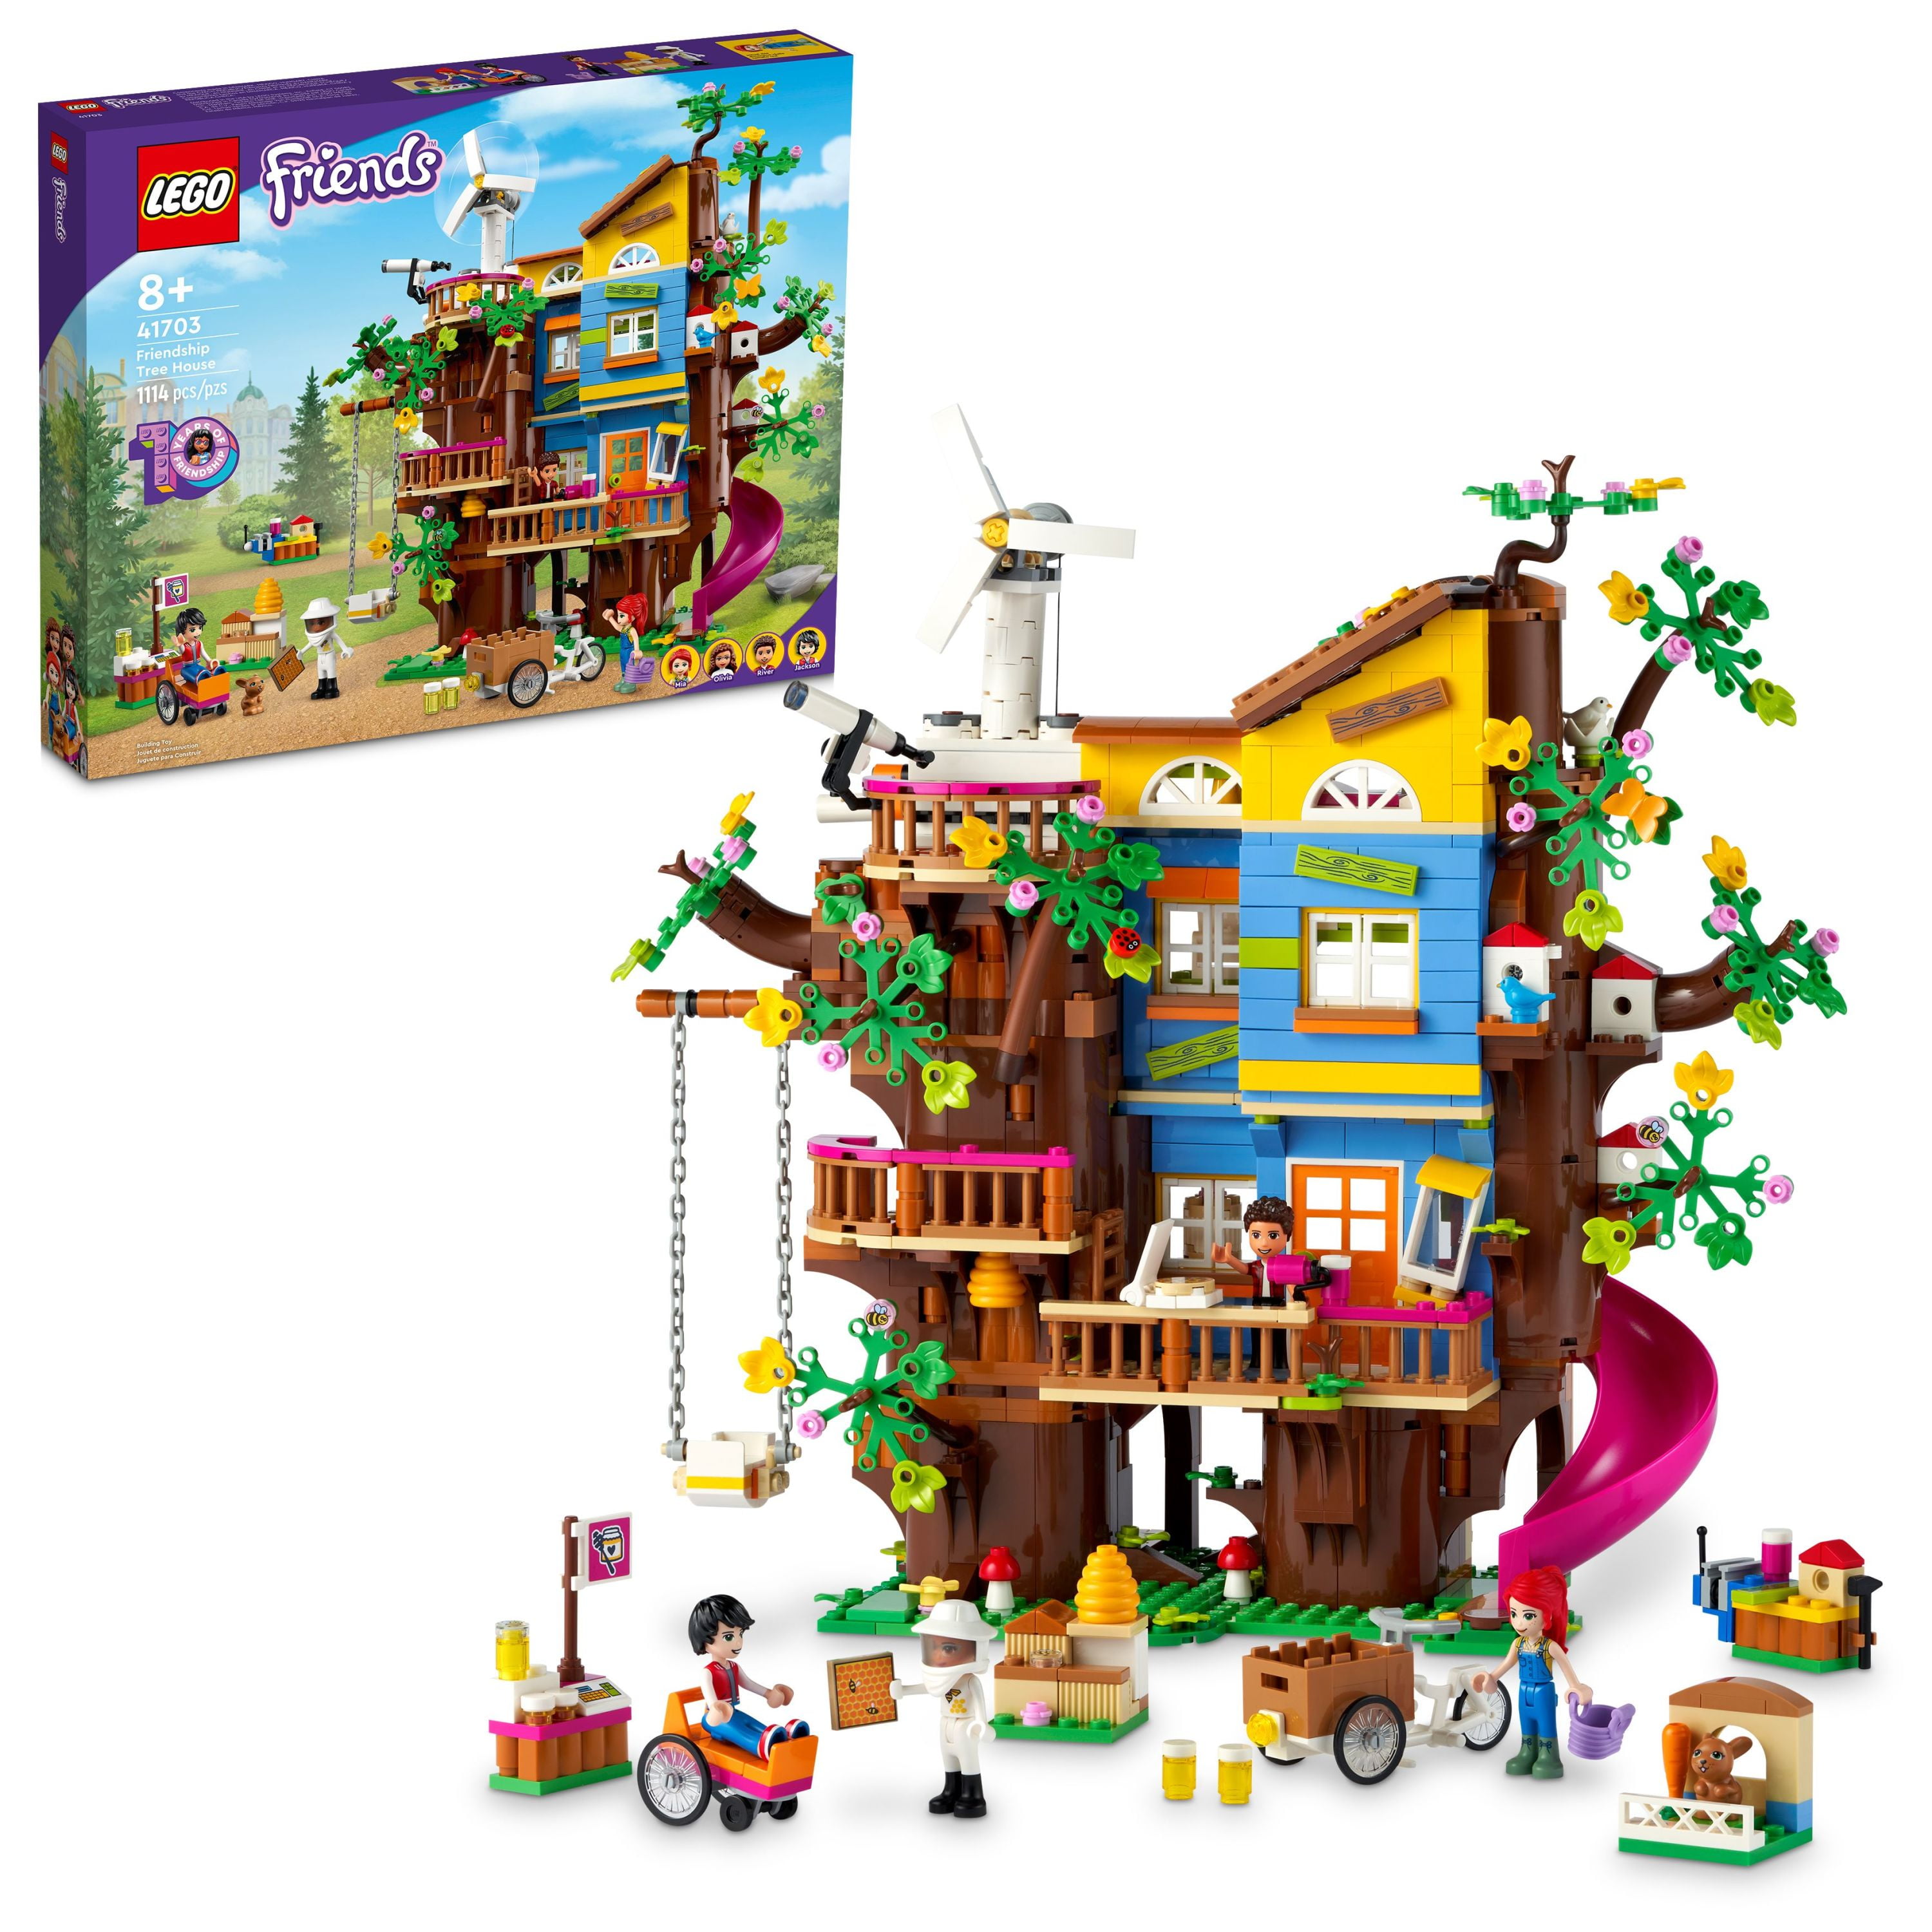 LEGO Friends Friendship Tree House 41703 Set with Mia Mini Doll, Nature Eco Care Educational Toy, Gifts for Kids, Girls and Boys aged 8 Plus